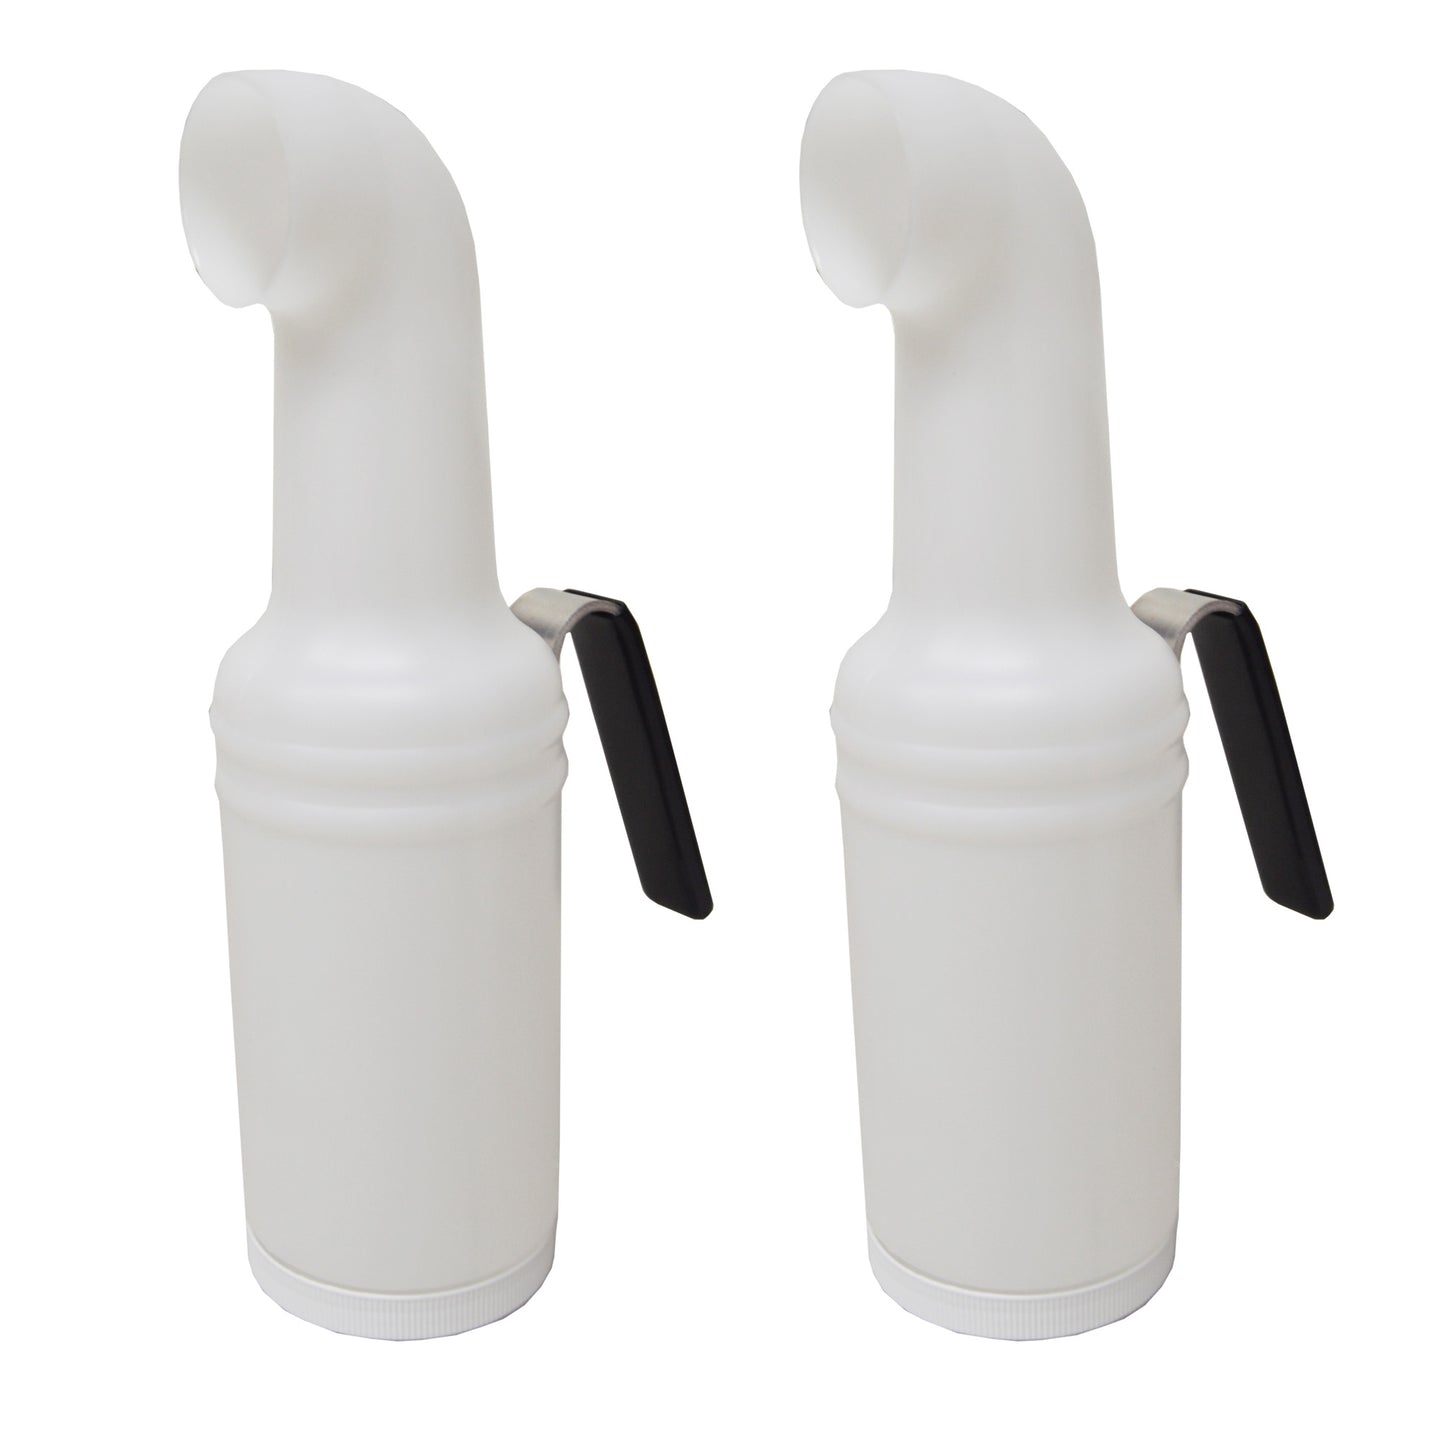 Sand & Seed Bottle with Handle - Set of 2 Bottles